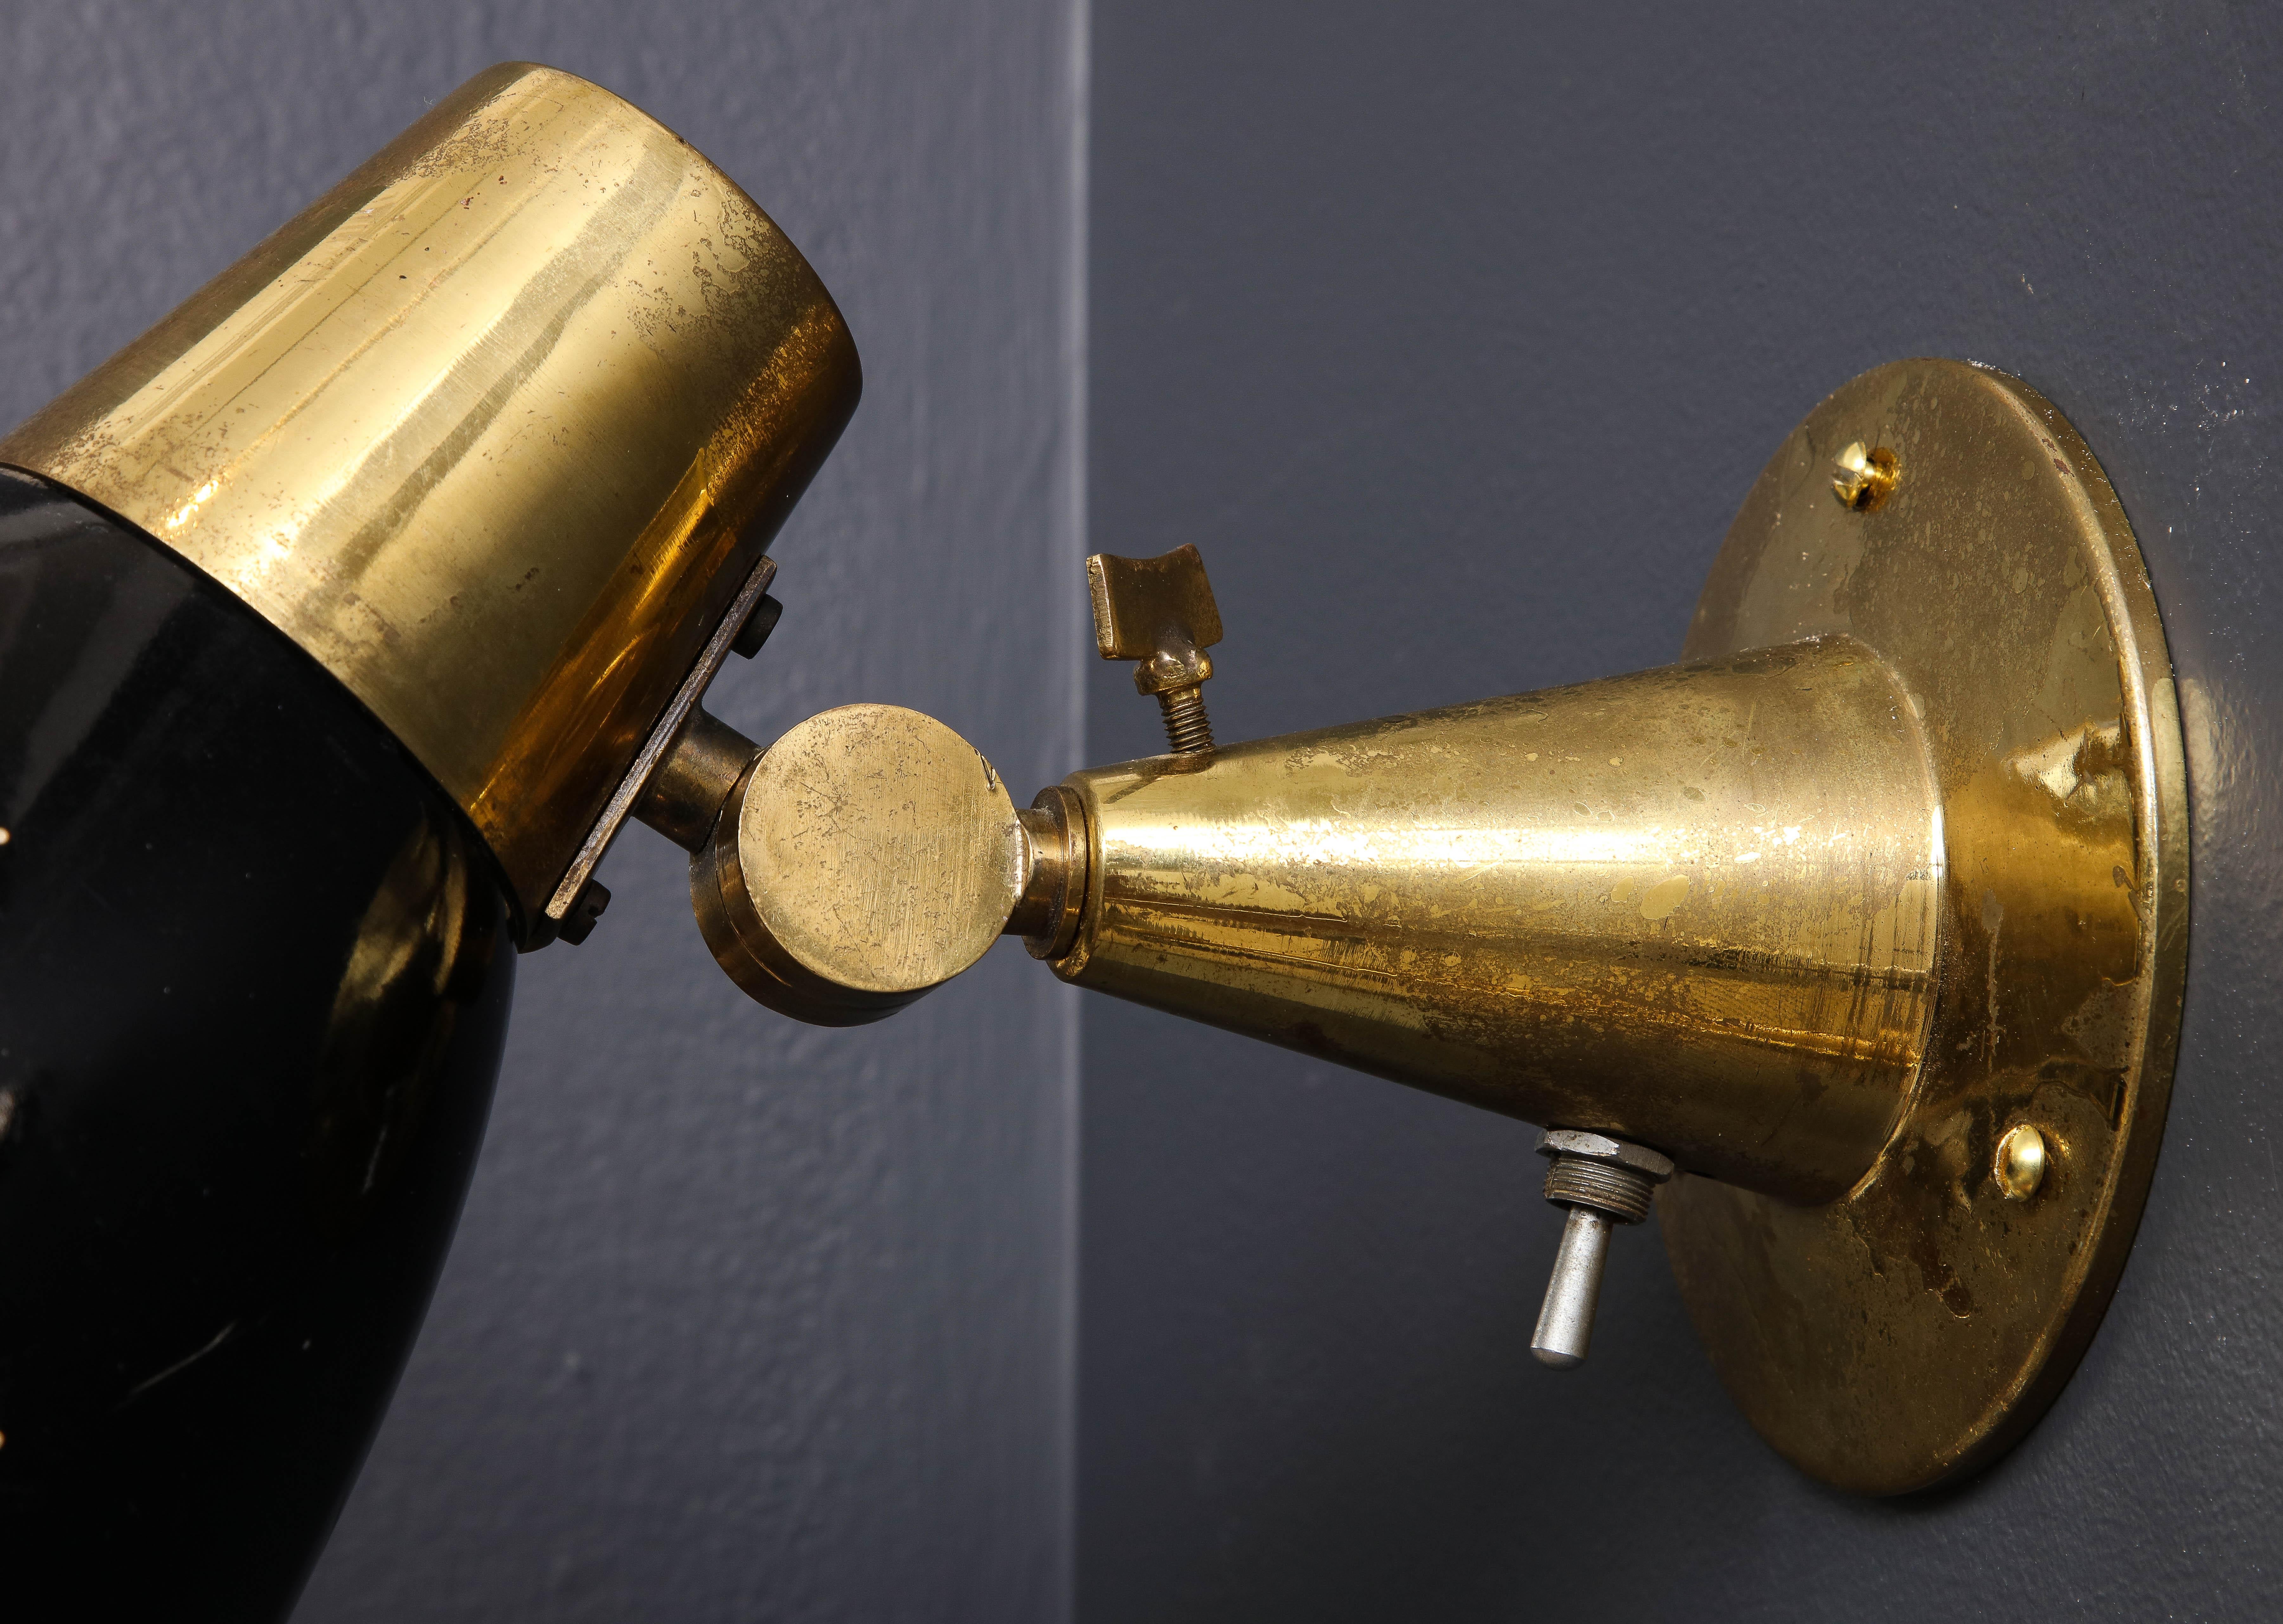 Pair of Midcentury Italian Brass and Enameled Steel Sconces, 1950s For Sale 3